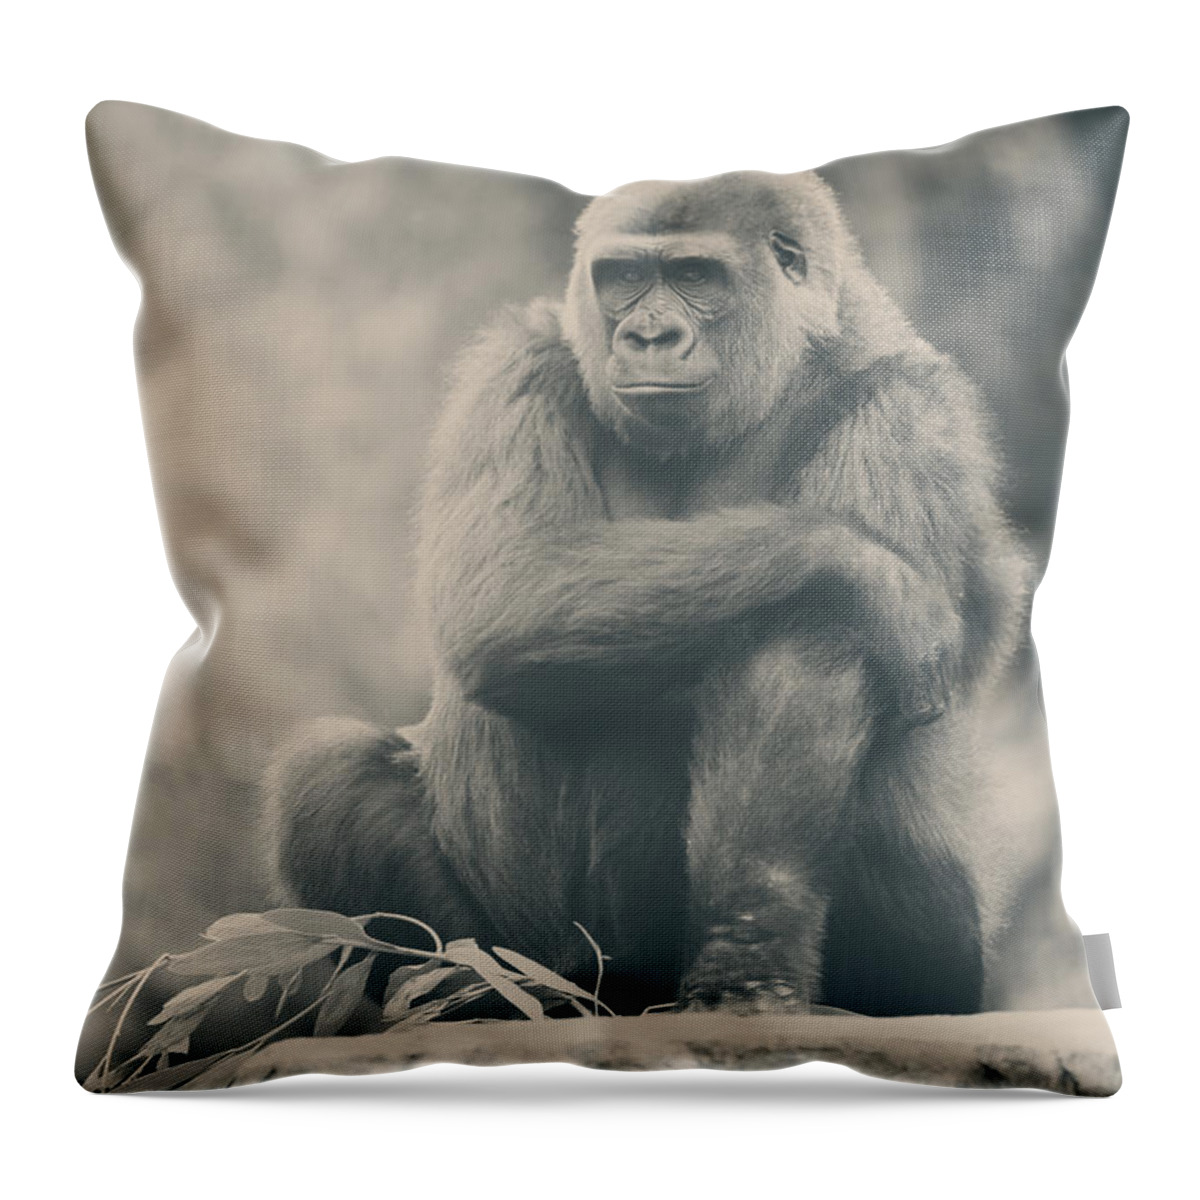 Gorillas Throw Pillow featuring the photograph Looking So Sad by Laurie Search